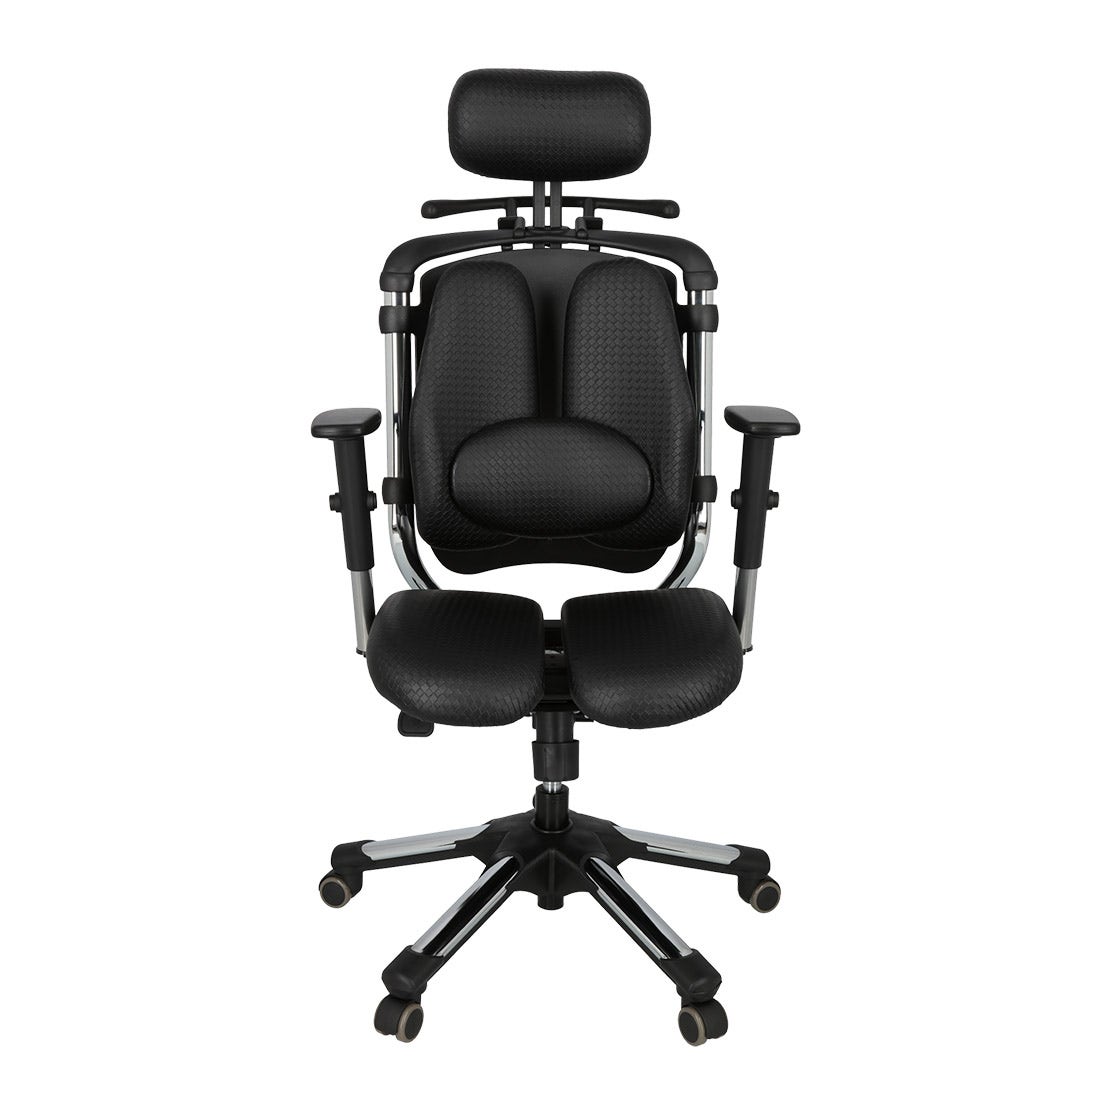 39014938-furniture-home-office-gaming-office-chair-01